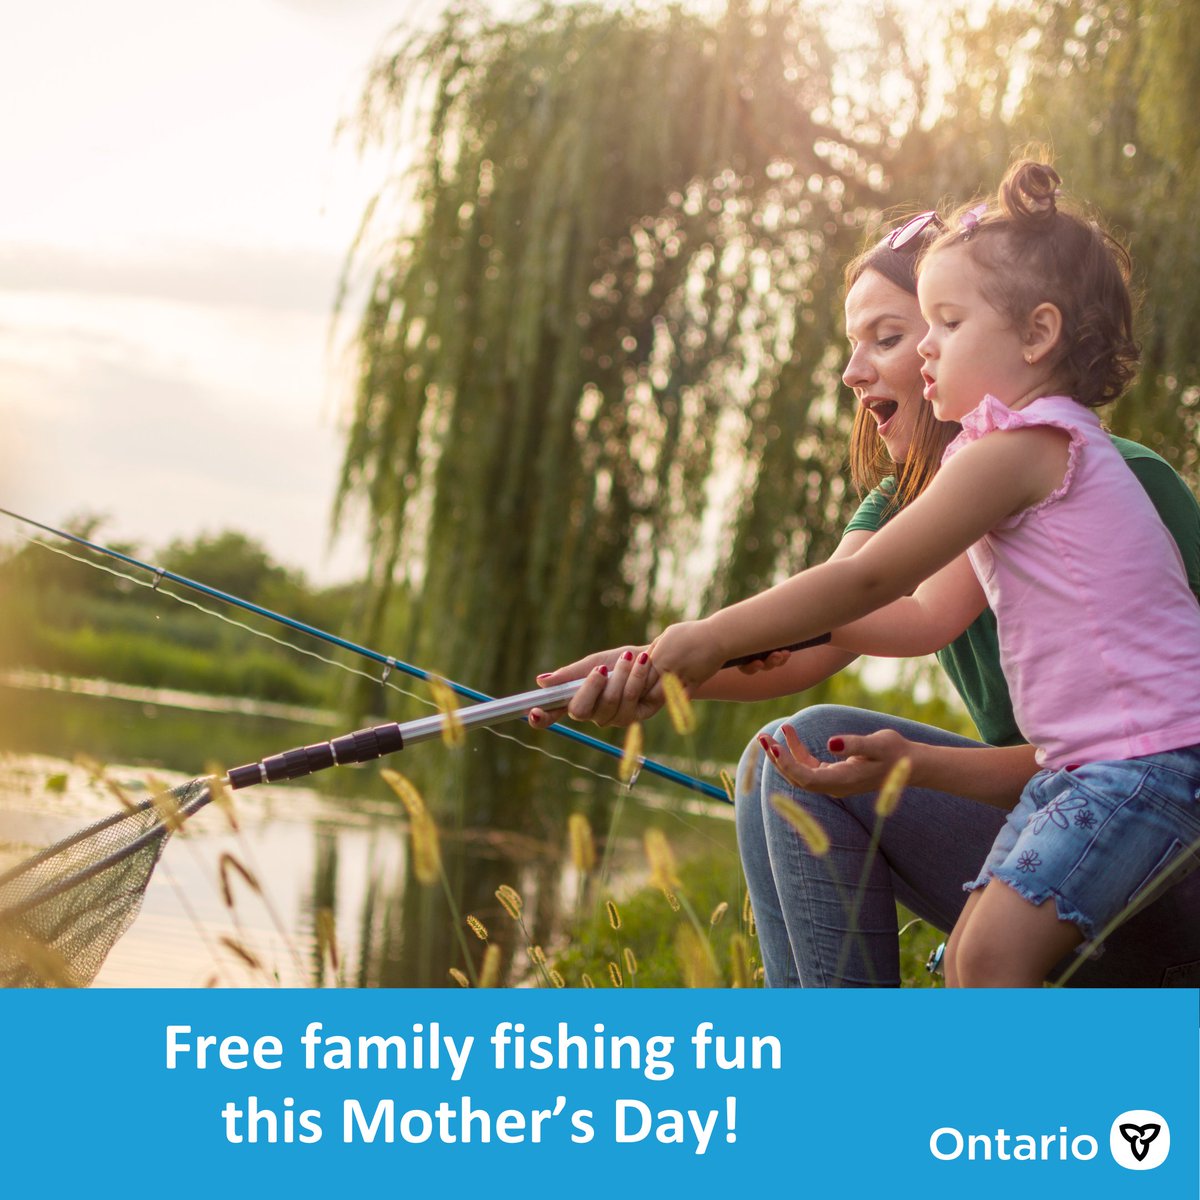 Give the gift of Ontario’s great outdoors with free family fishing this Mother’s Day weekend. Experience the vast fishing opportunities available across the province. Learn more: Ontario.ca/freefishing